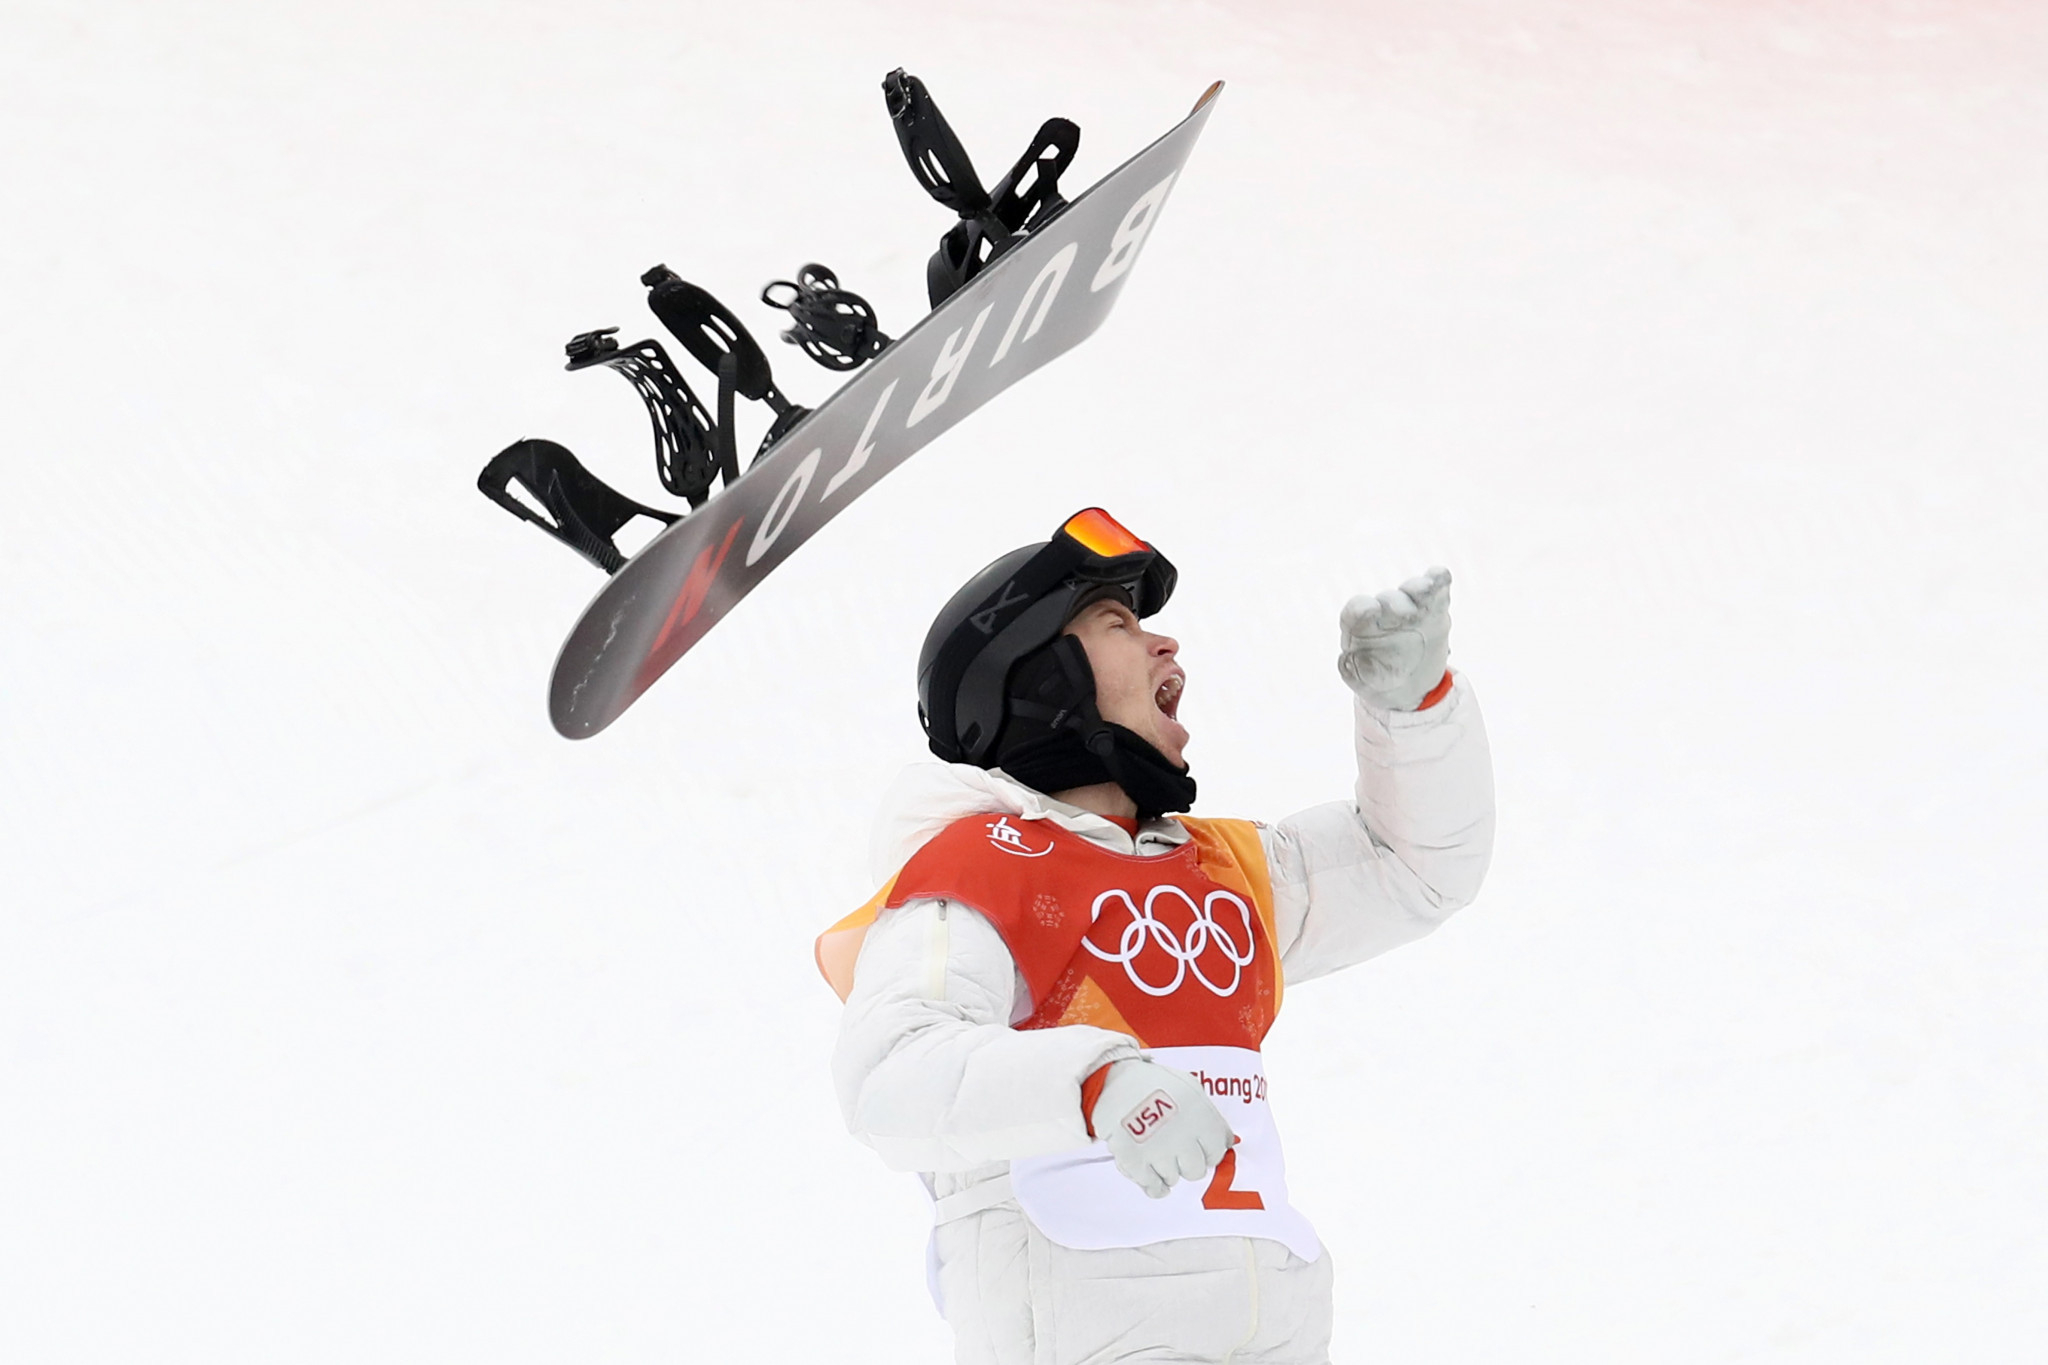 American Shaun White won a third consecutive Olympic gold in snowboard halfpipe ©Getty Images